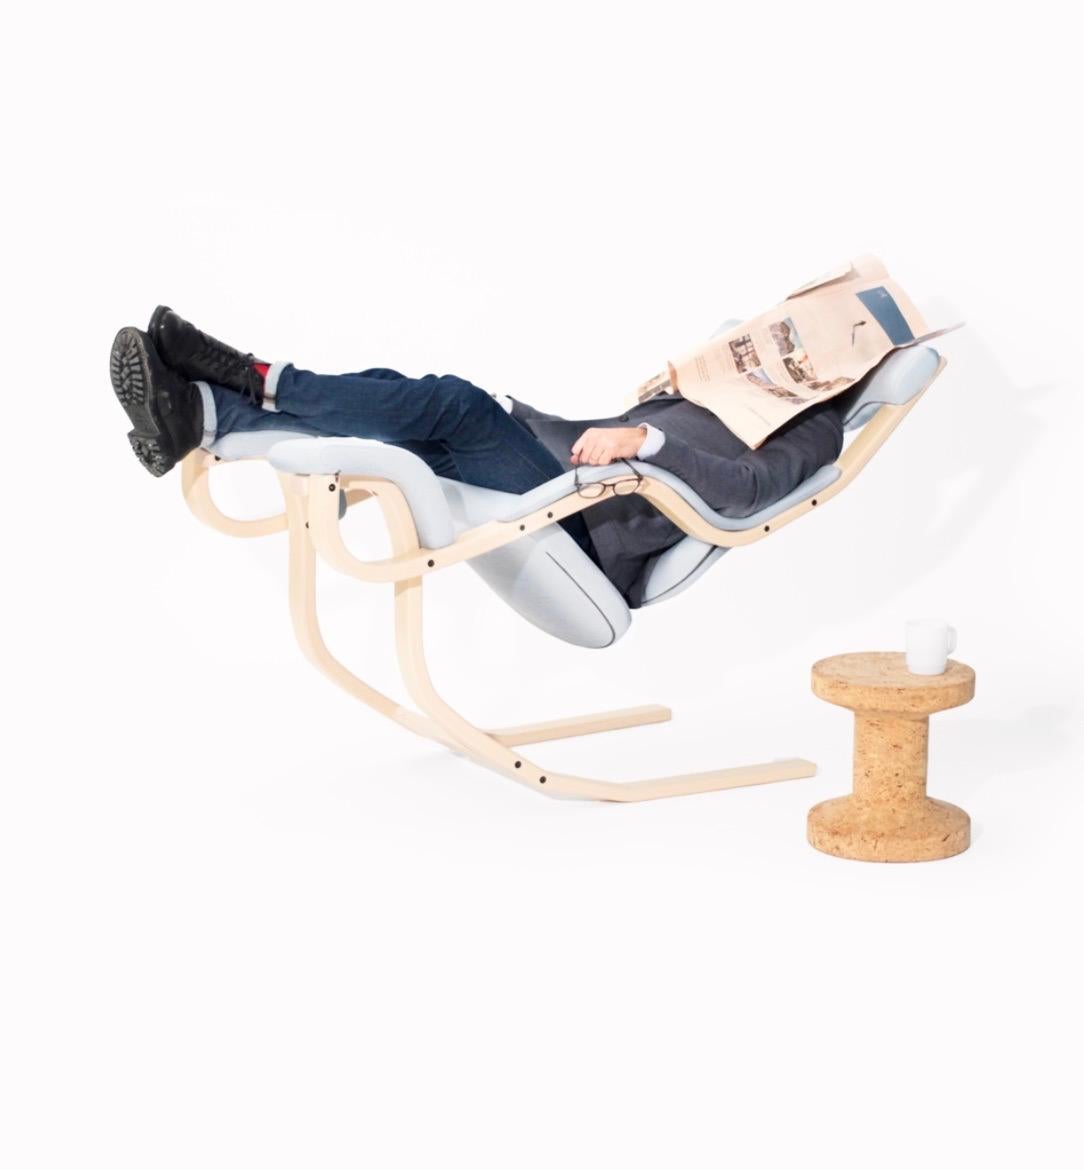 Varier Stokke Gravity Balans chair, grey textile and beach frame, peter Opsvik, 1984. Experience ultimate relaxation and weightlessness with the Gravity. The design Classic supports your back and neck while continuously promoting flow and movement